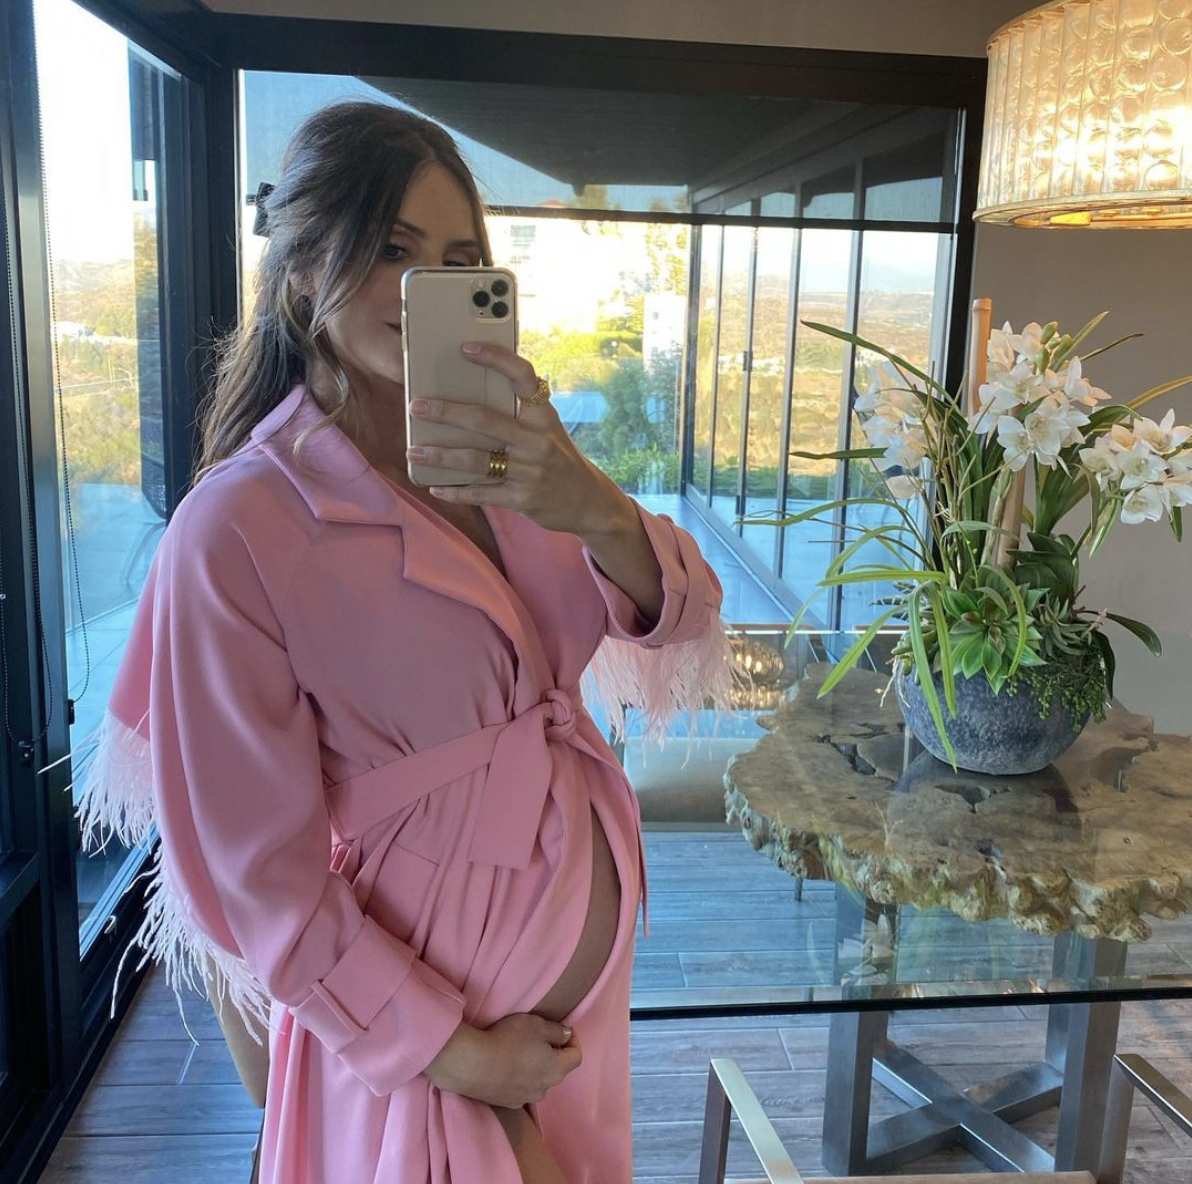 Katherine McPhee Foster snaps a selfie with her growing baby bump for Instagram on Tuesday, Jan. 19, 2021. The 36-year-old actress is expecting her first child with husband David Foster.